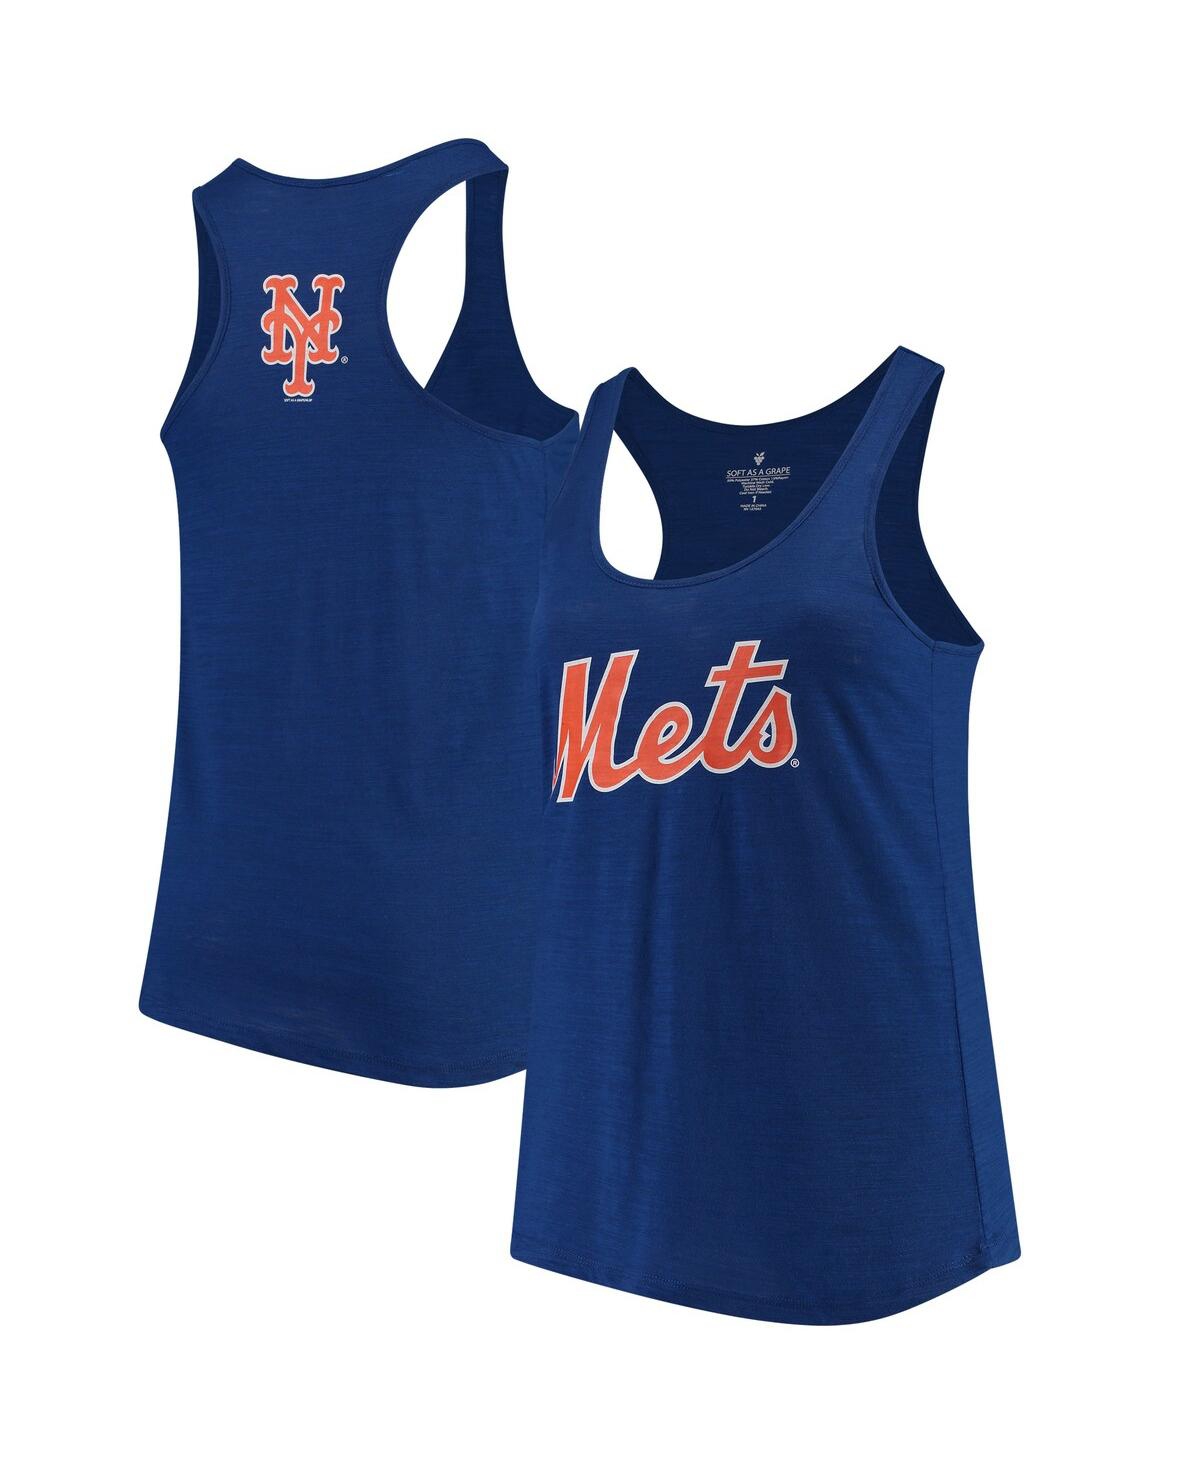 Women's Soft As A Grape Royal New York Mets Plus Size Swing for the Fences Racerback Tank Top - Royal